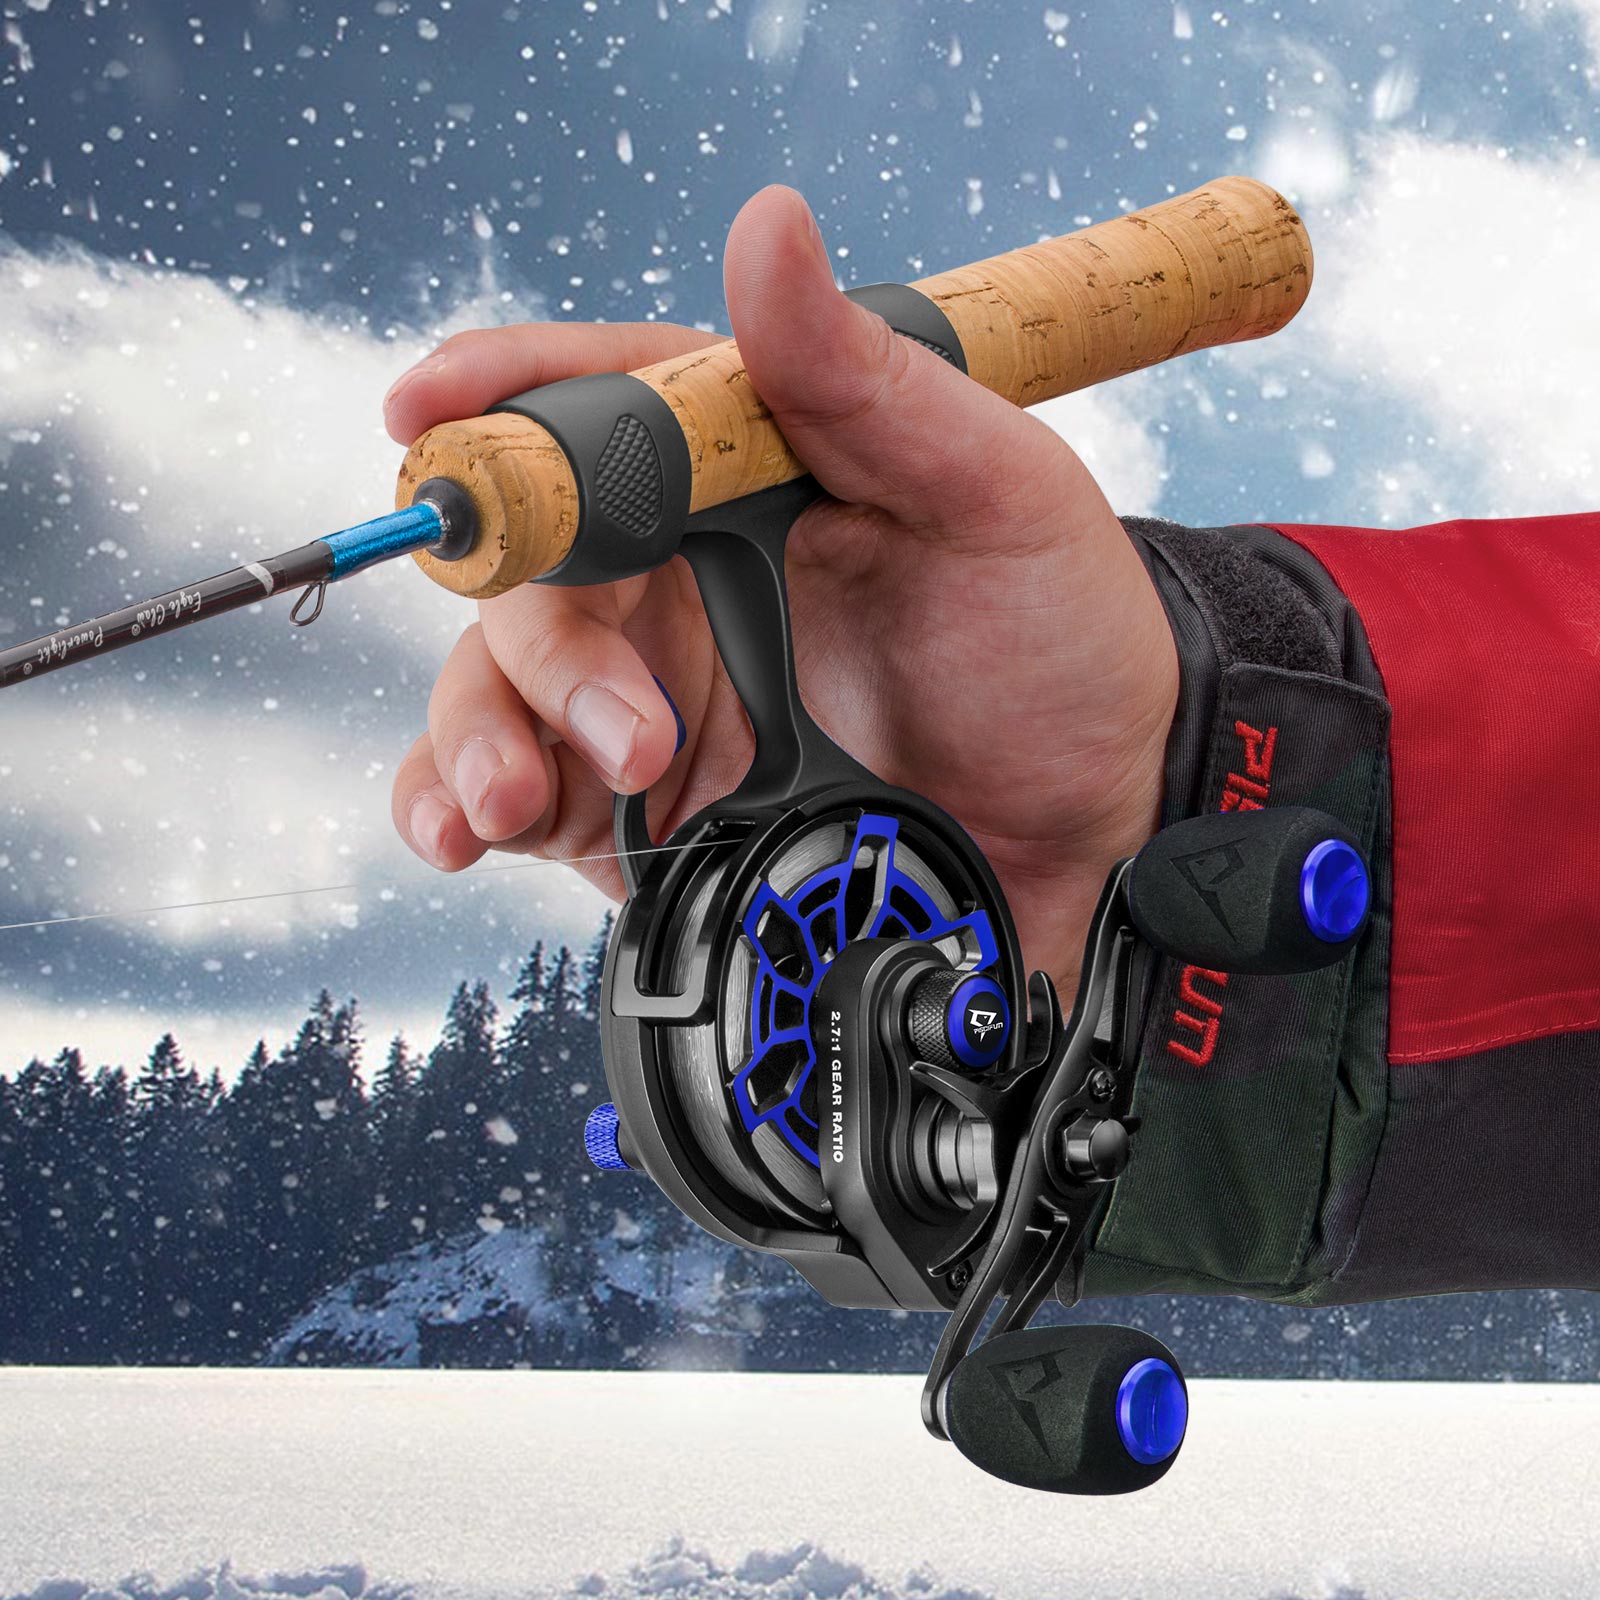 Piscifun ICX Ice Fishing Reel Inline, Ultra Smooth, CNC Machined Aluminum,  7+1 Shielded Ball Bearings From Hui09, $171.96